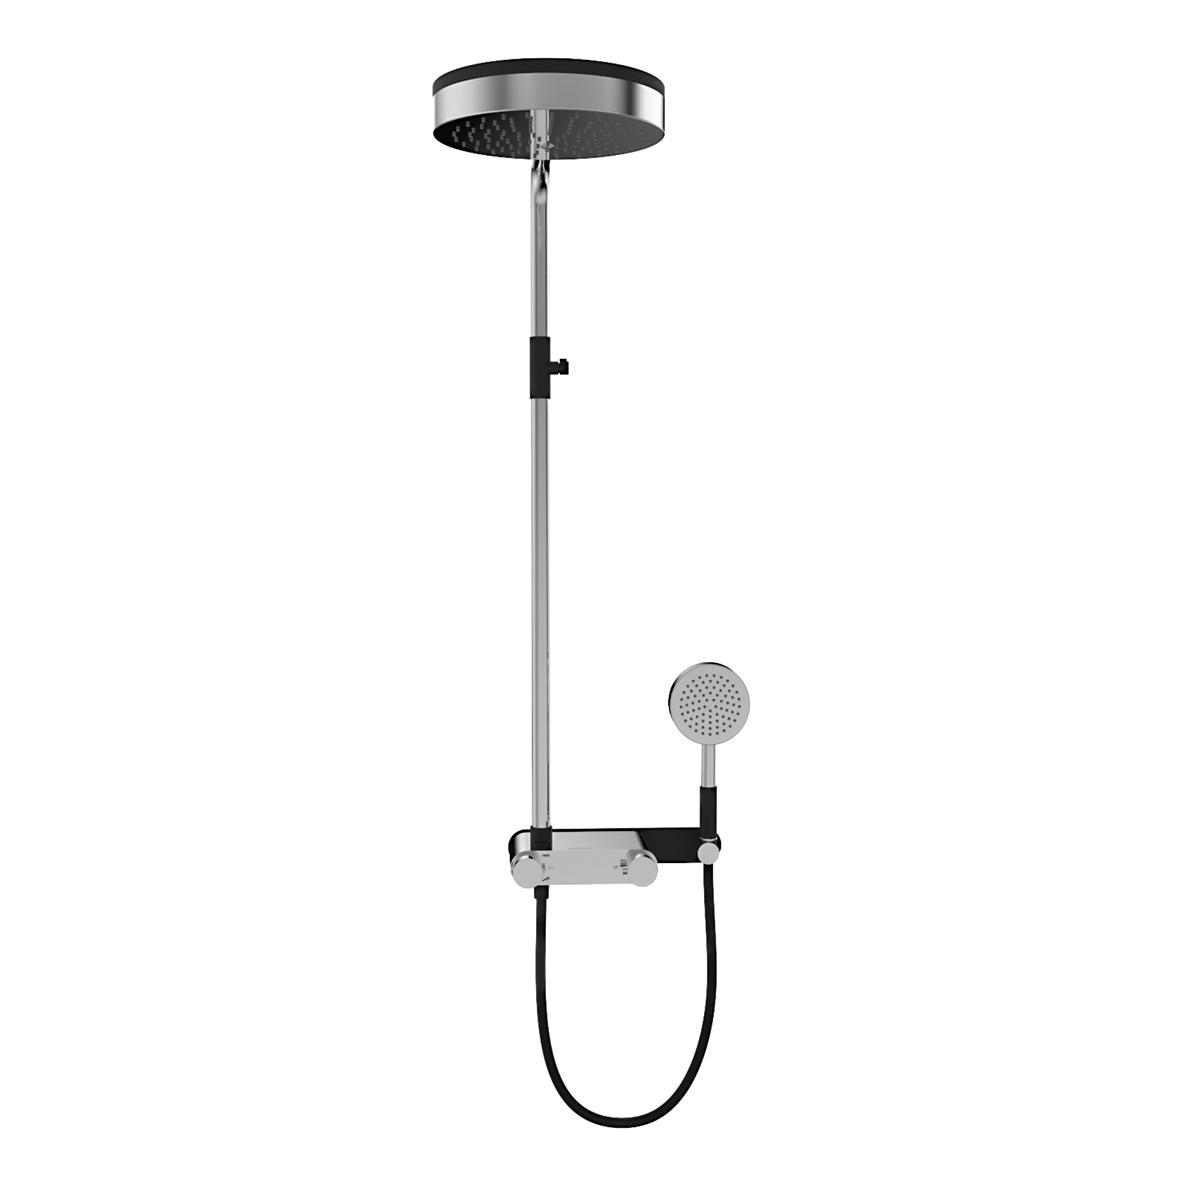 YS34206	Luxury shower column, rain shower column with thermostatic faucet, height adjustable;